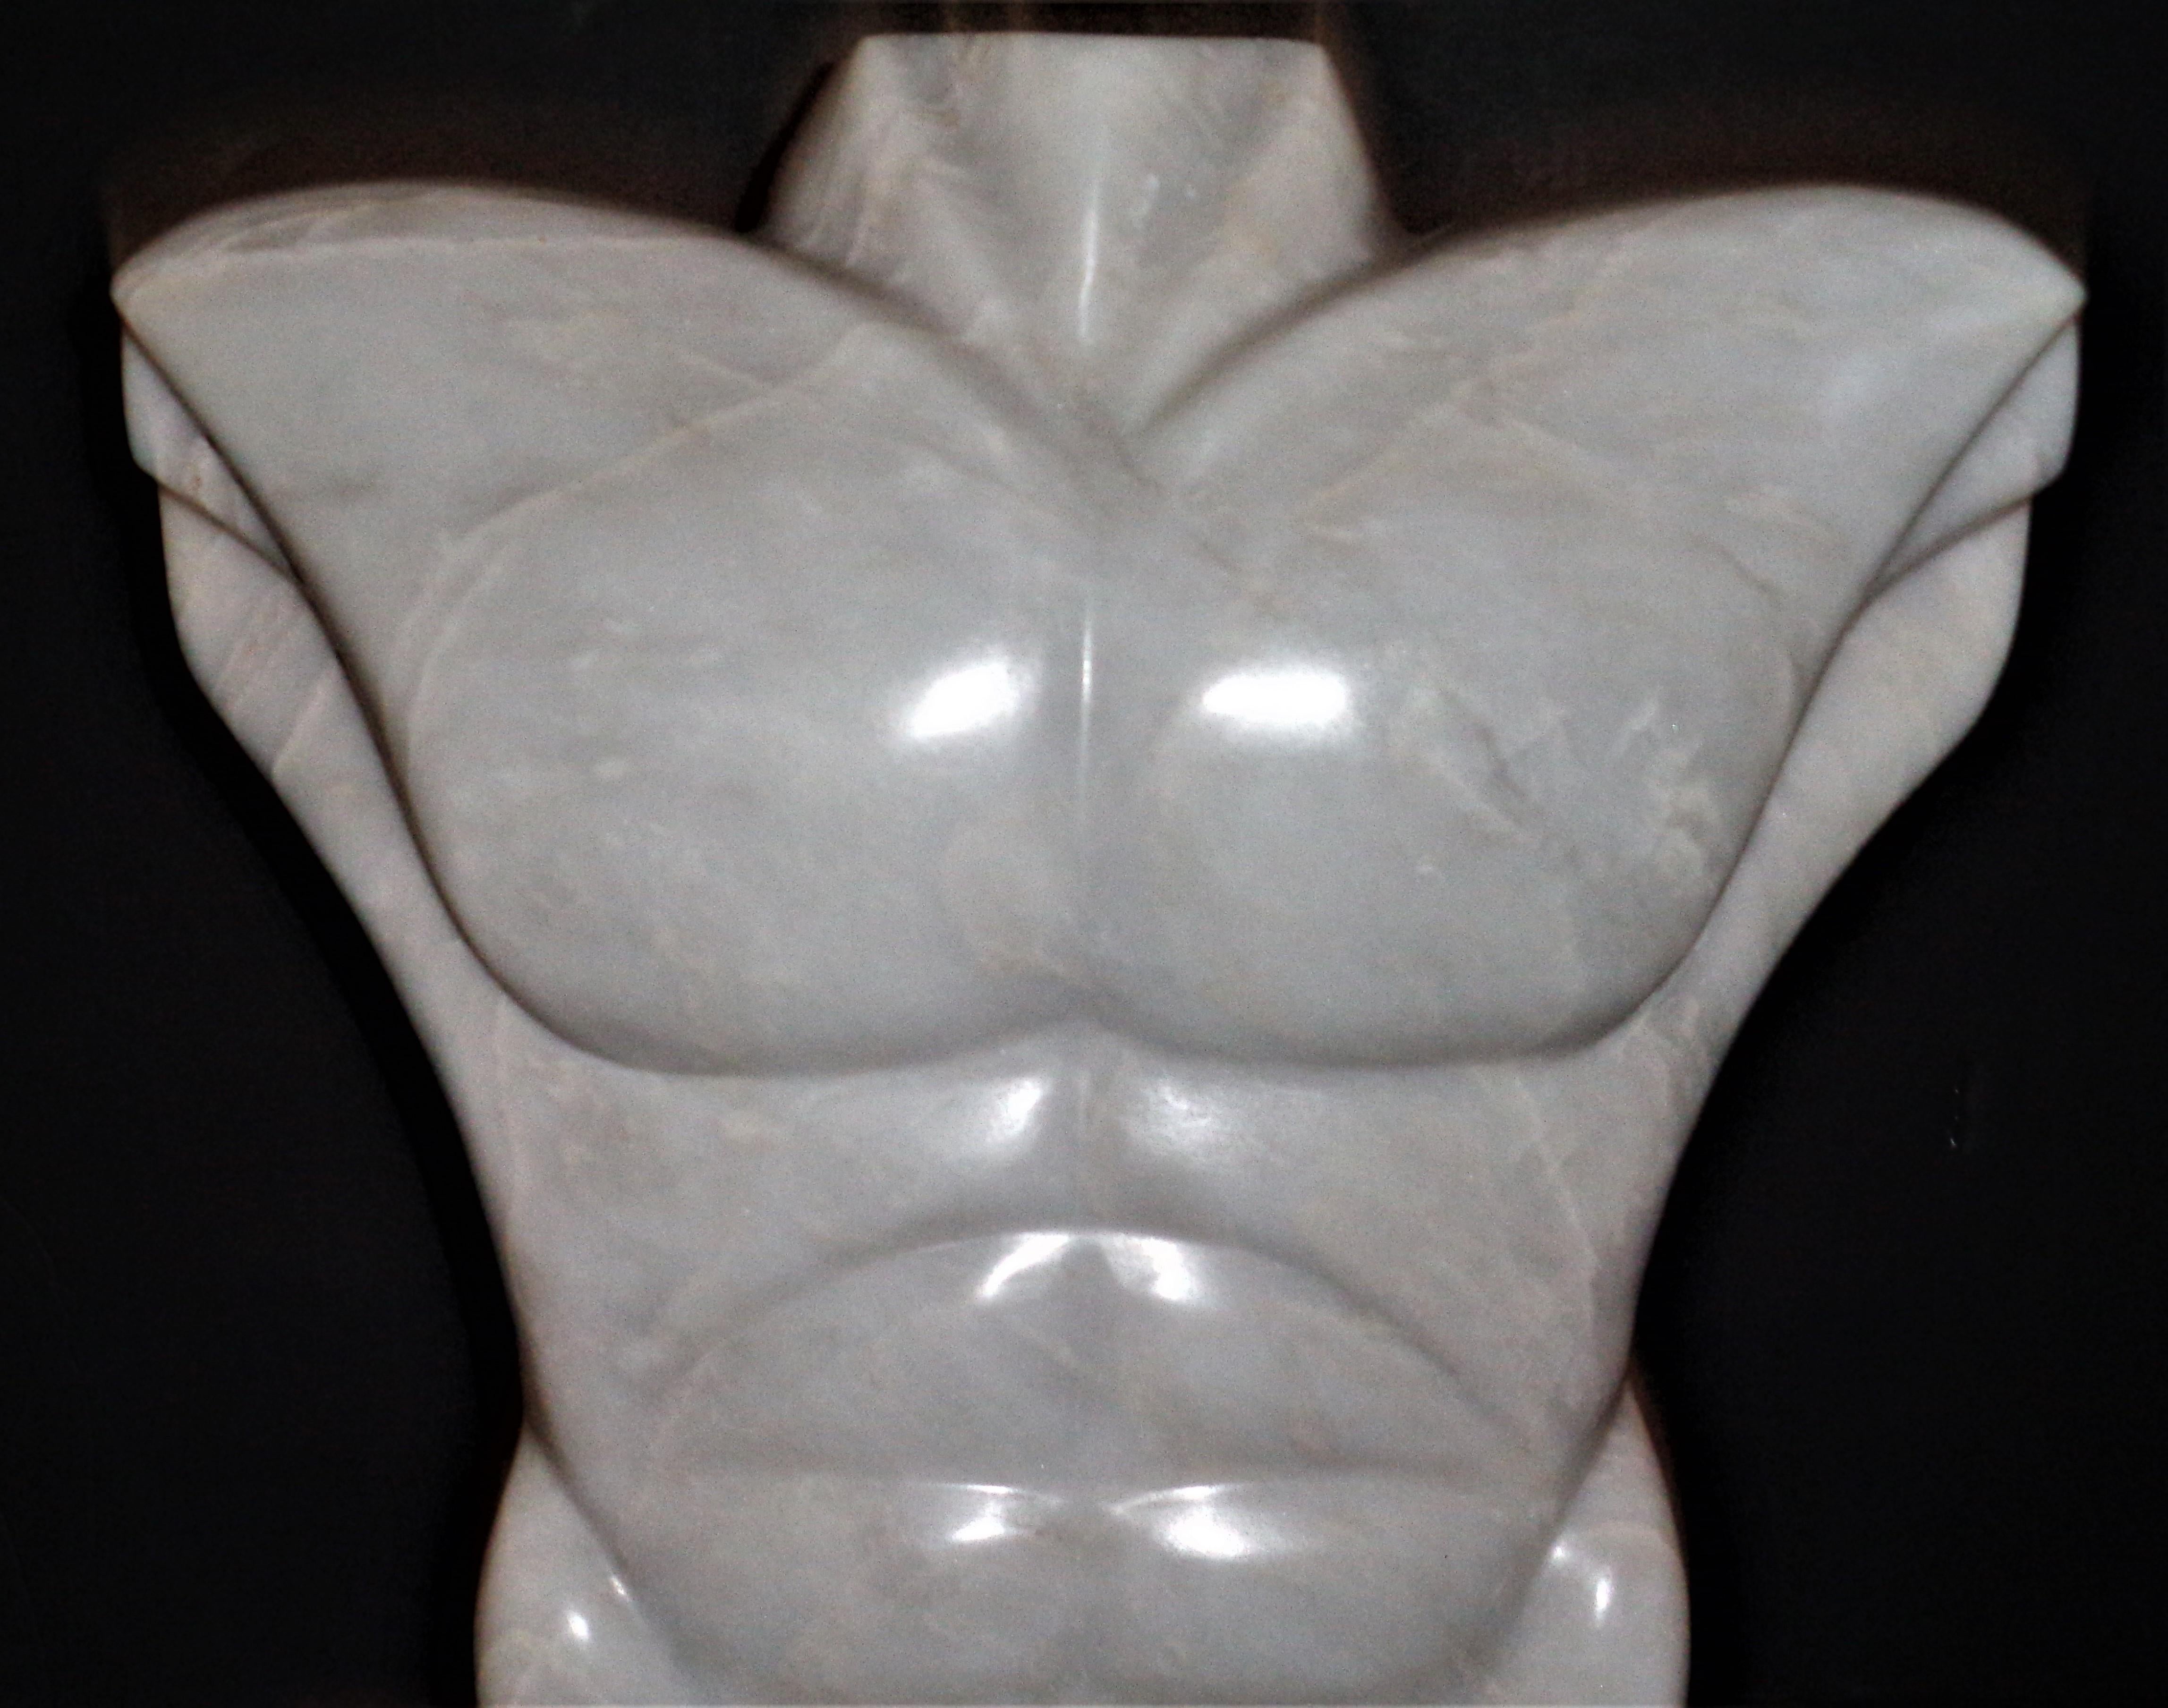 Polished solid white marble sculpture of a well defined classical male torso by Maitland Smith - see gold foil label on underside. All original vintage condition with nice color and good veining to marble. Circa 1980's. Look at all pictures and read